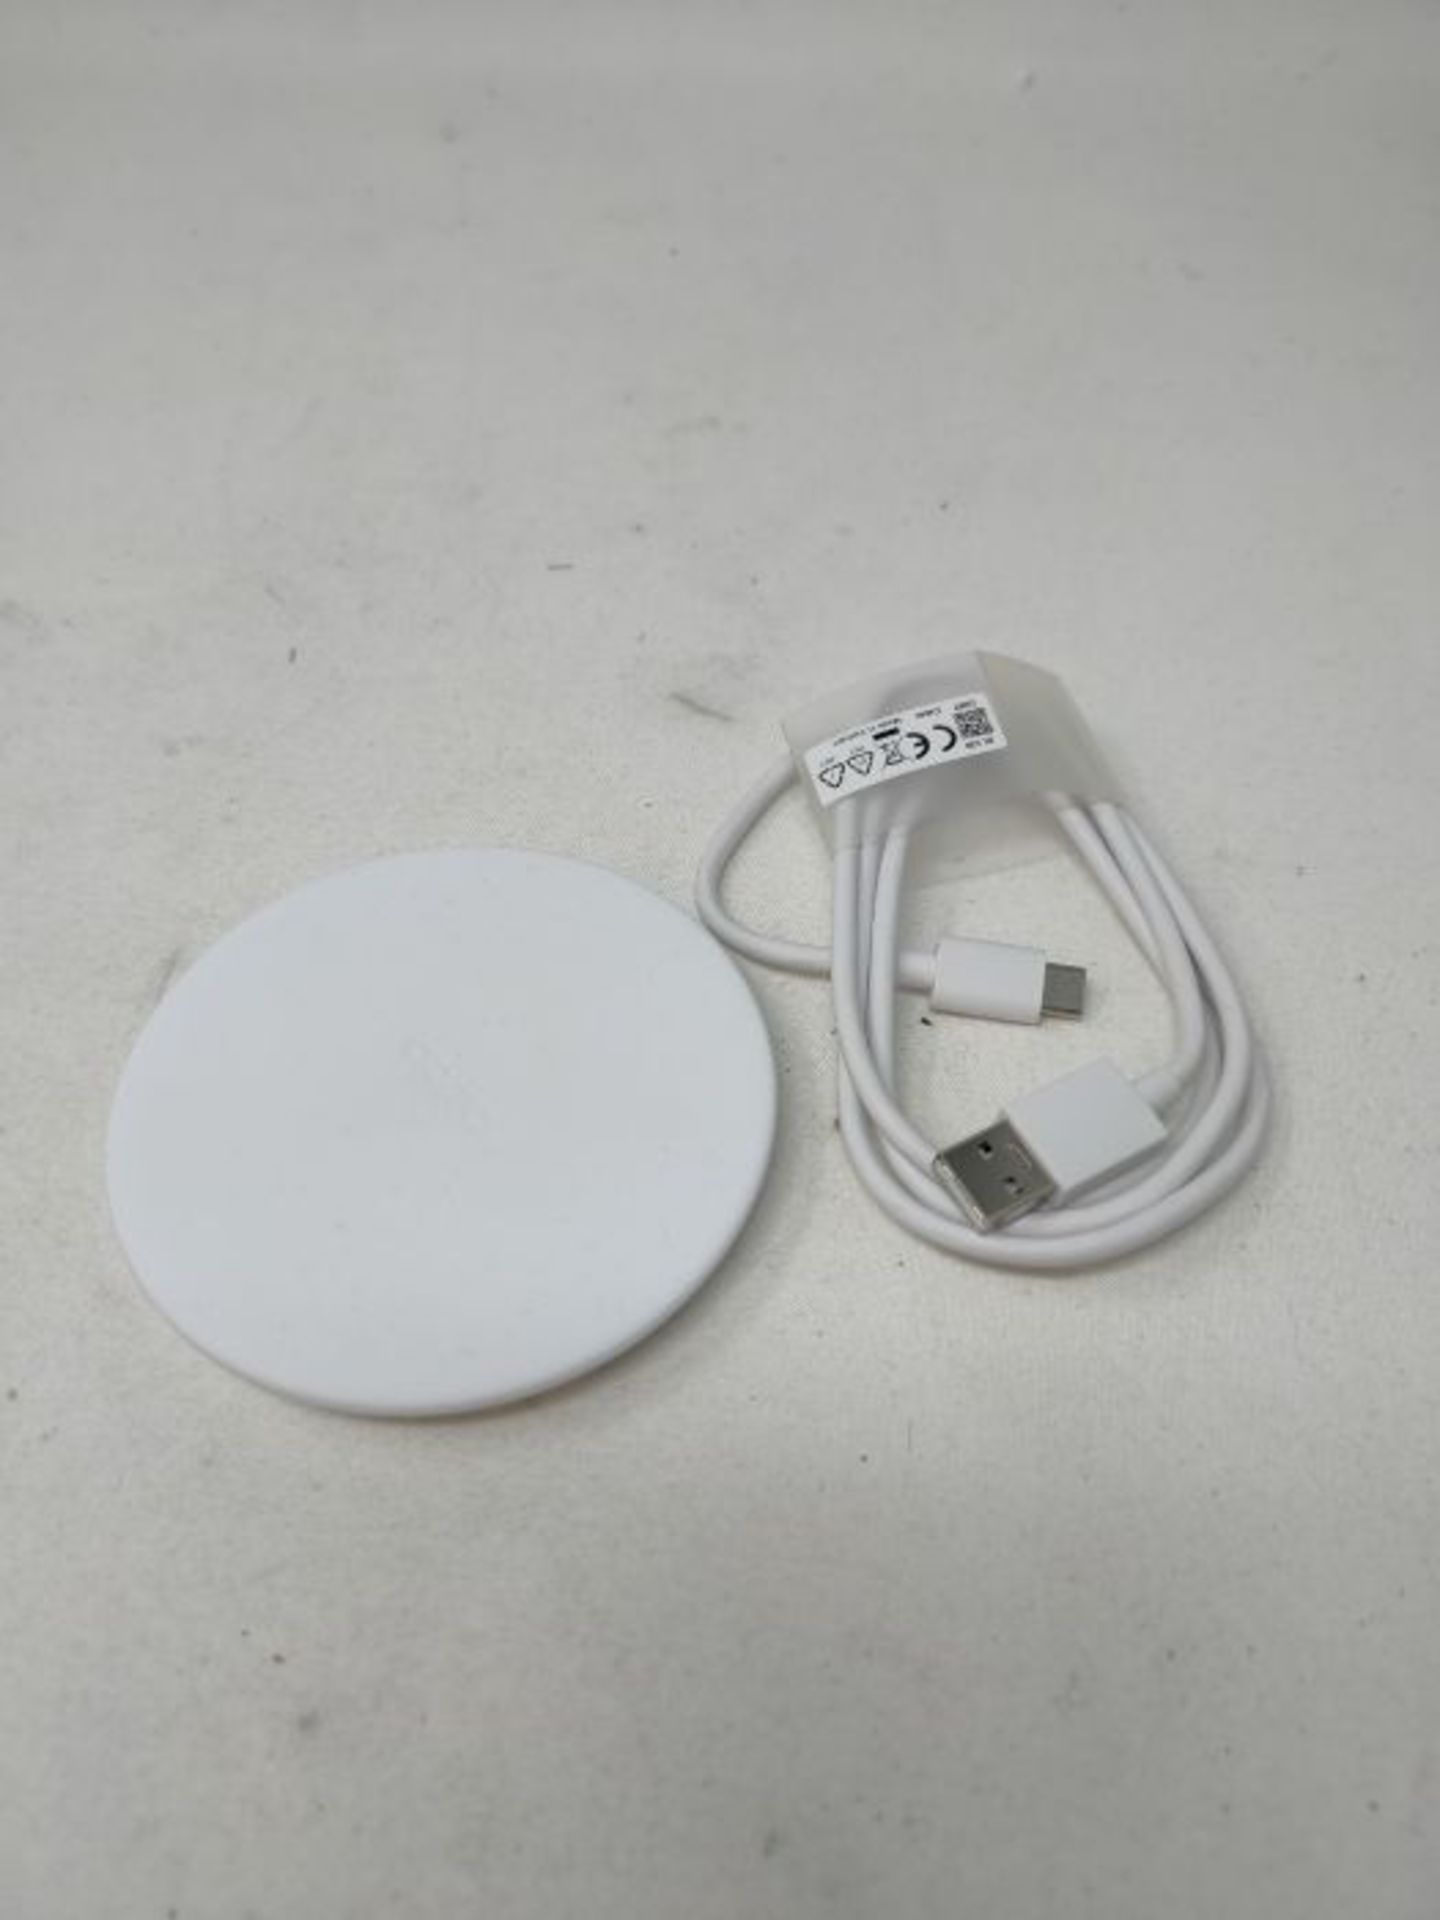 OPPO Original Wireless Charger for Smartphones and All Devices Wireless Charging, Powe - Image 2 of 2